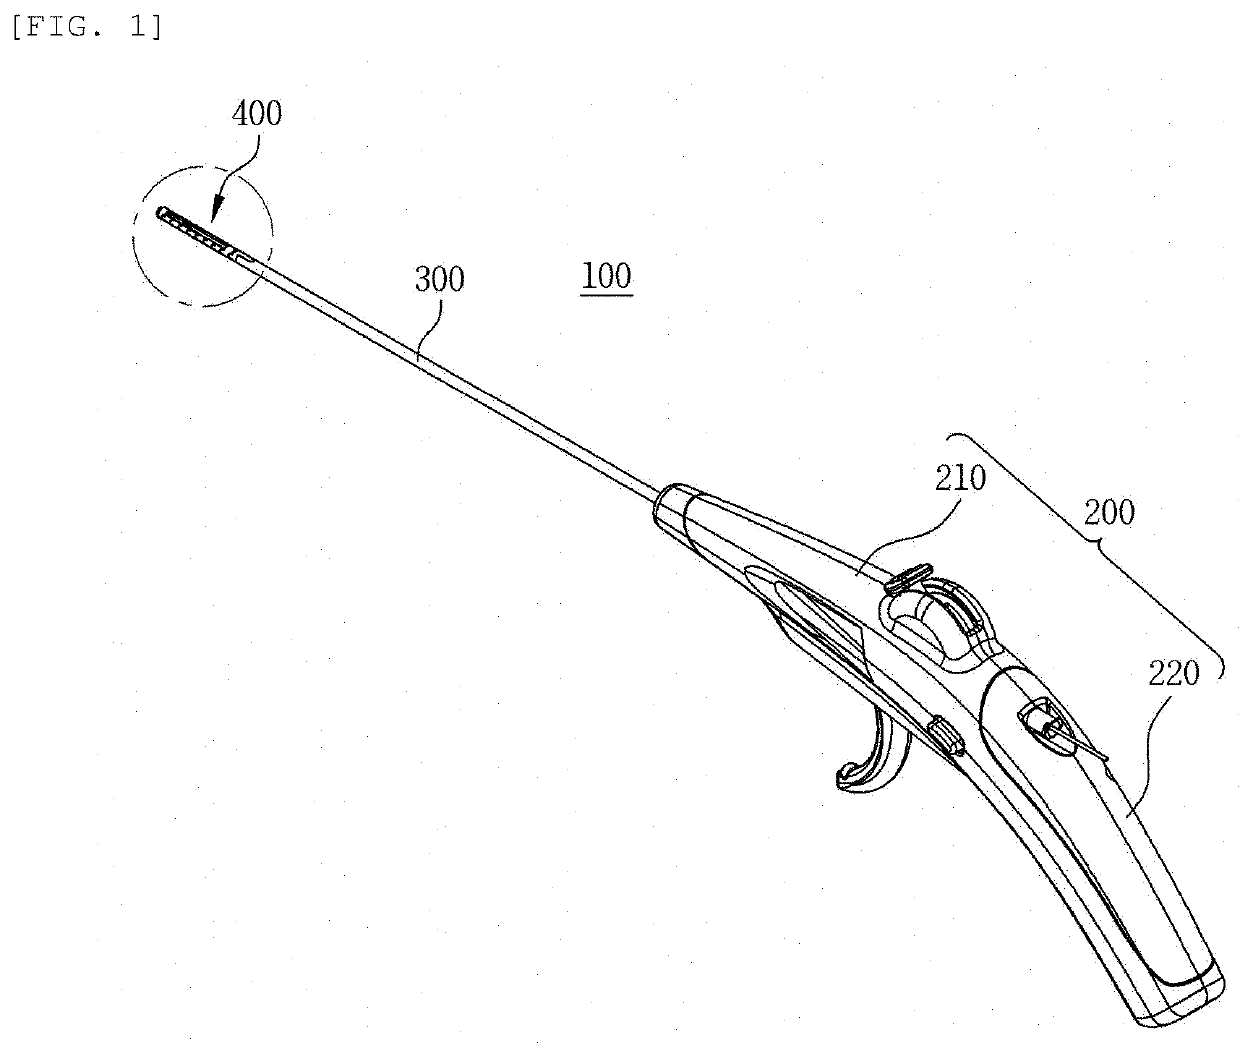 Tissue removal device